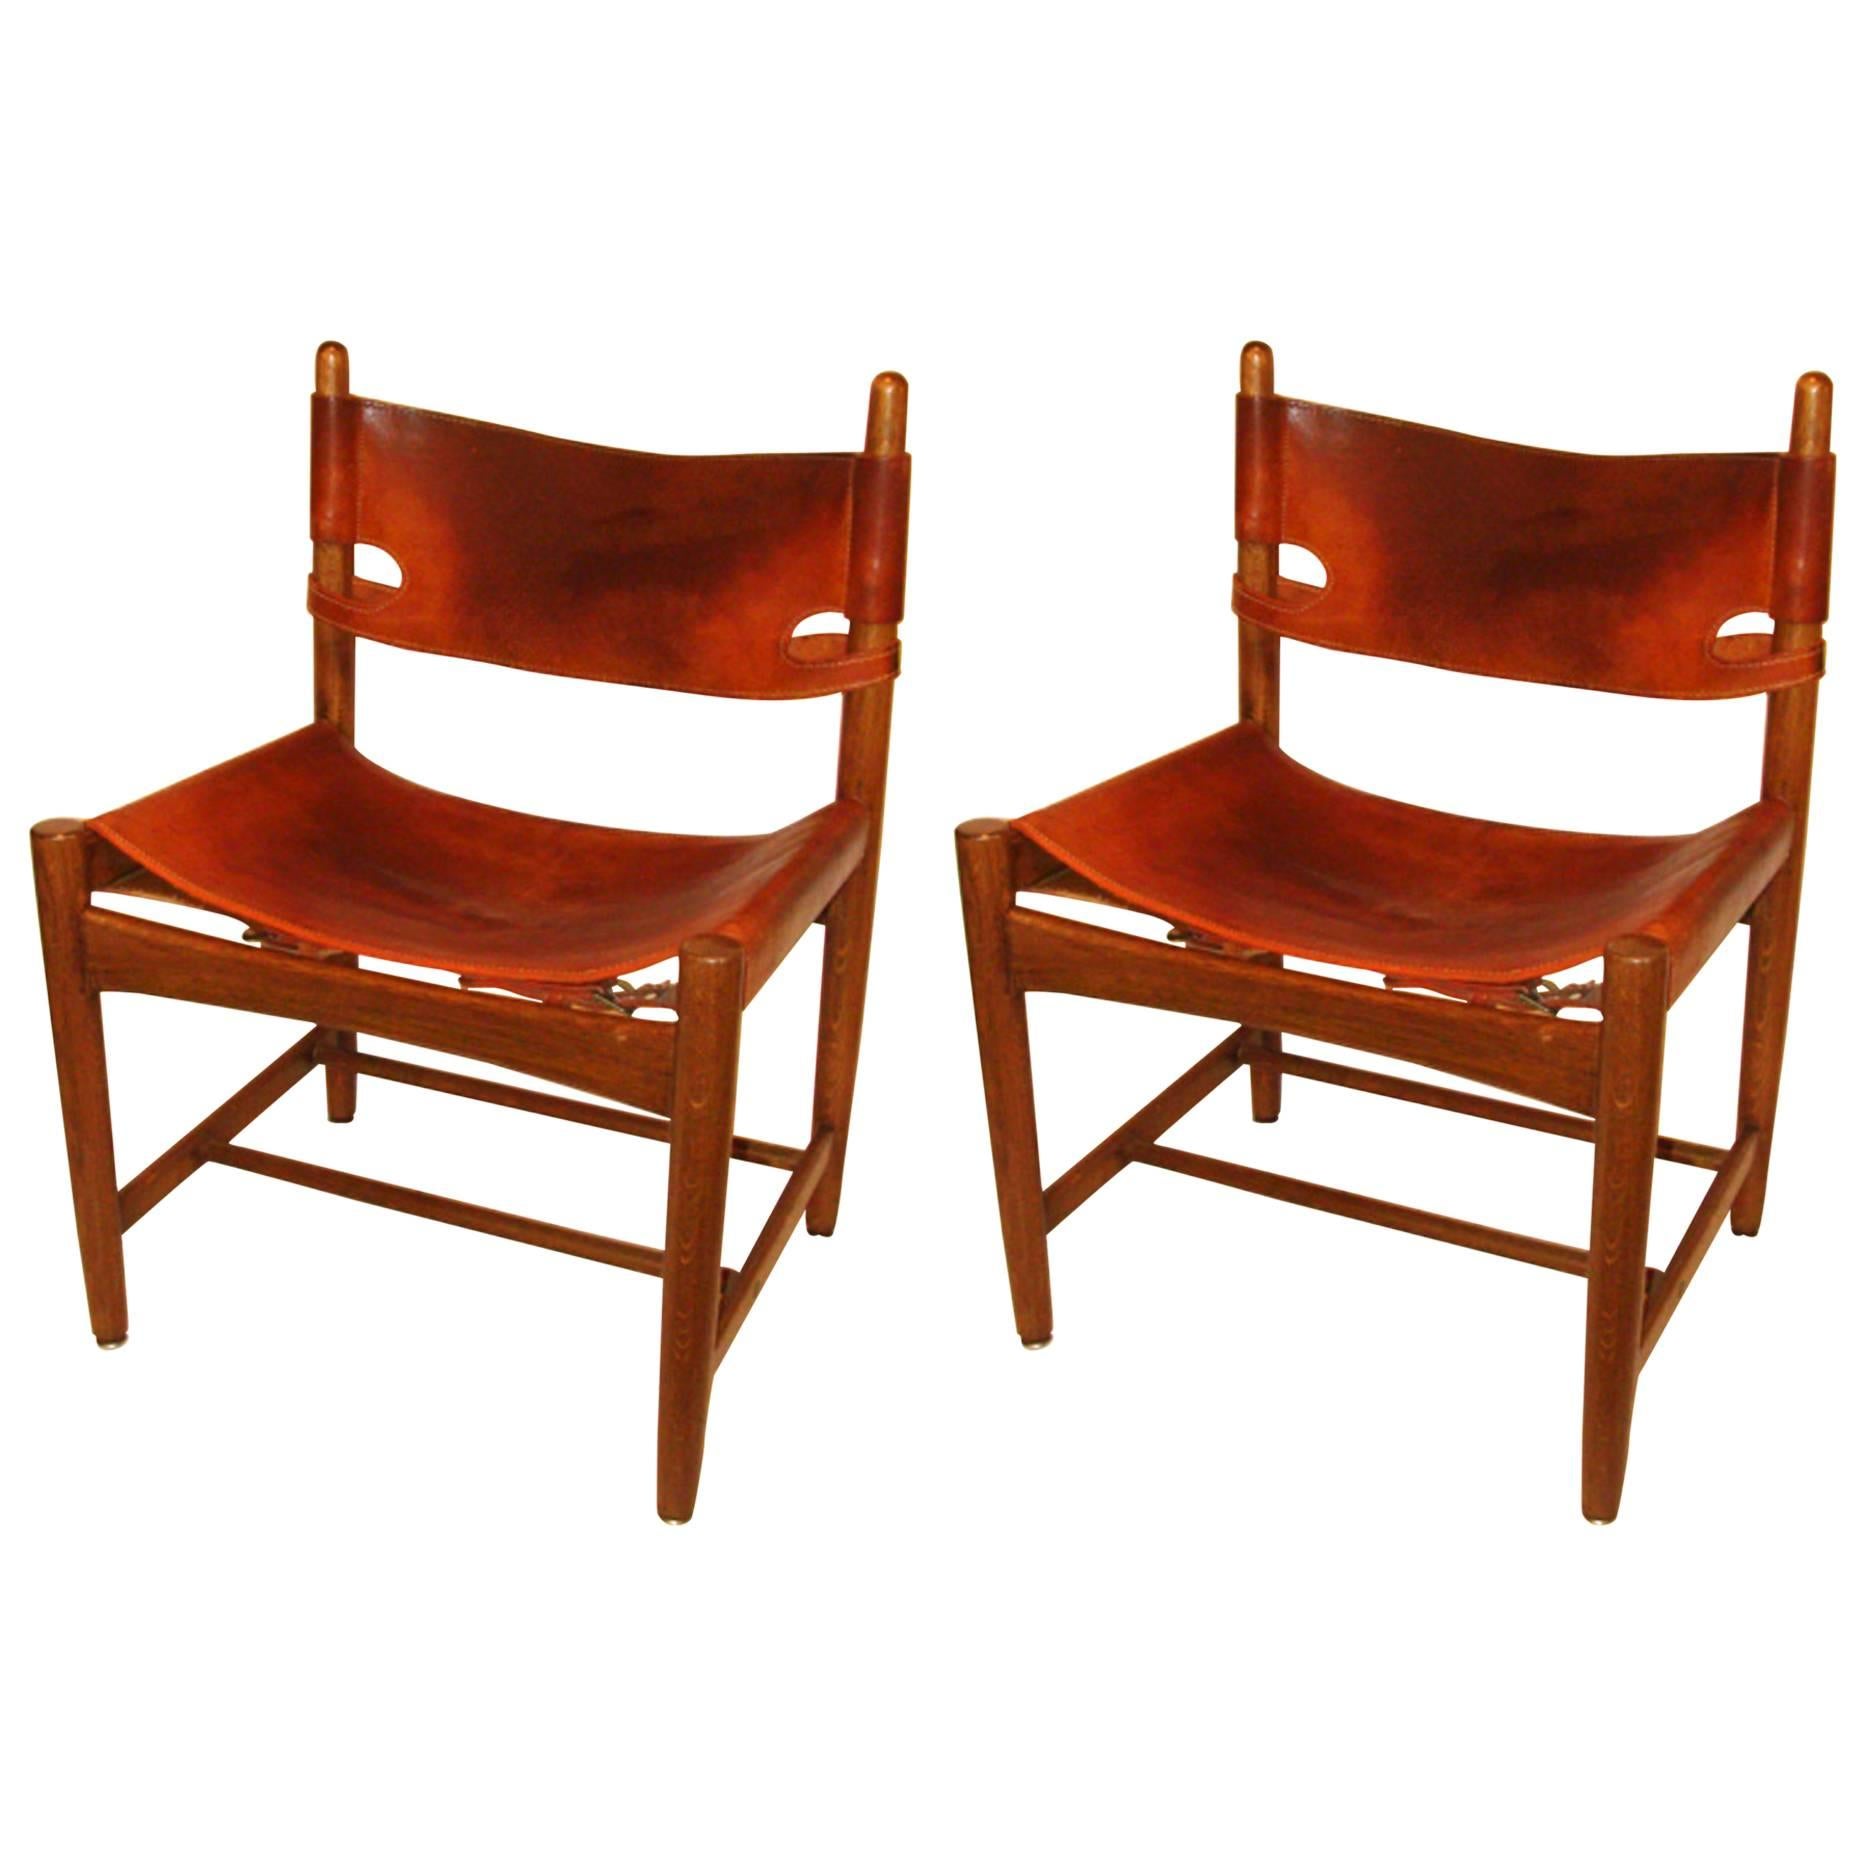 Pair of Vintage Borge Mogensen "Hunting Chairs"